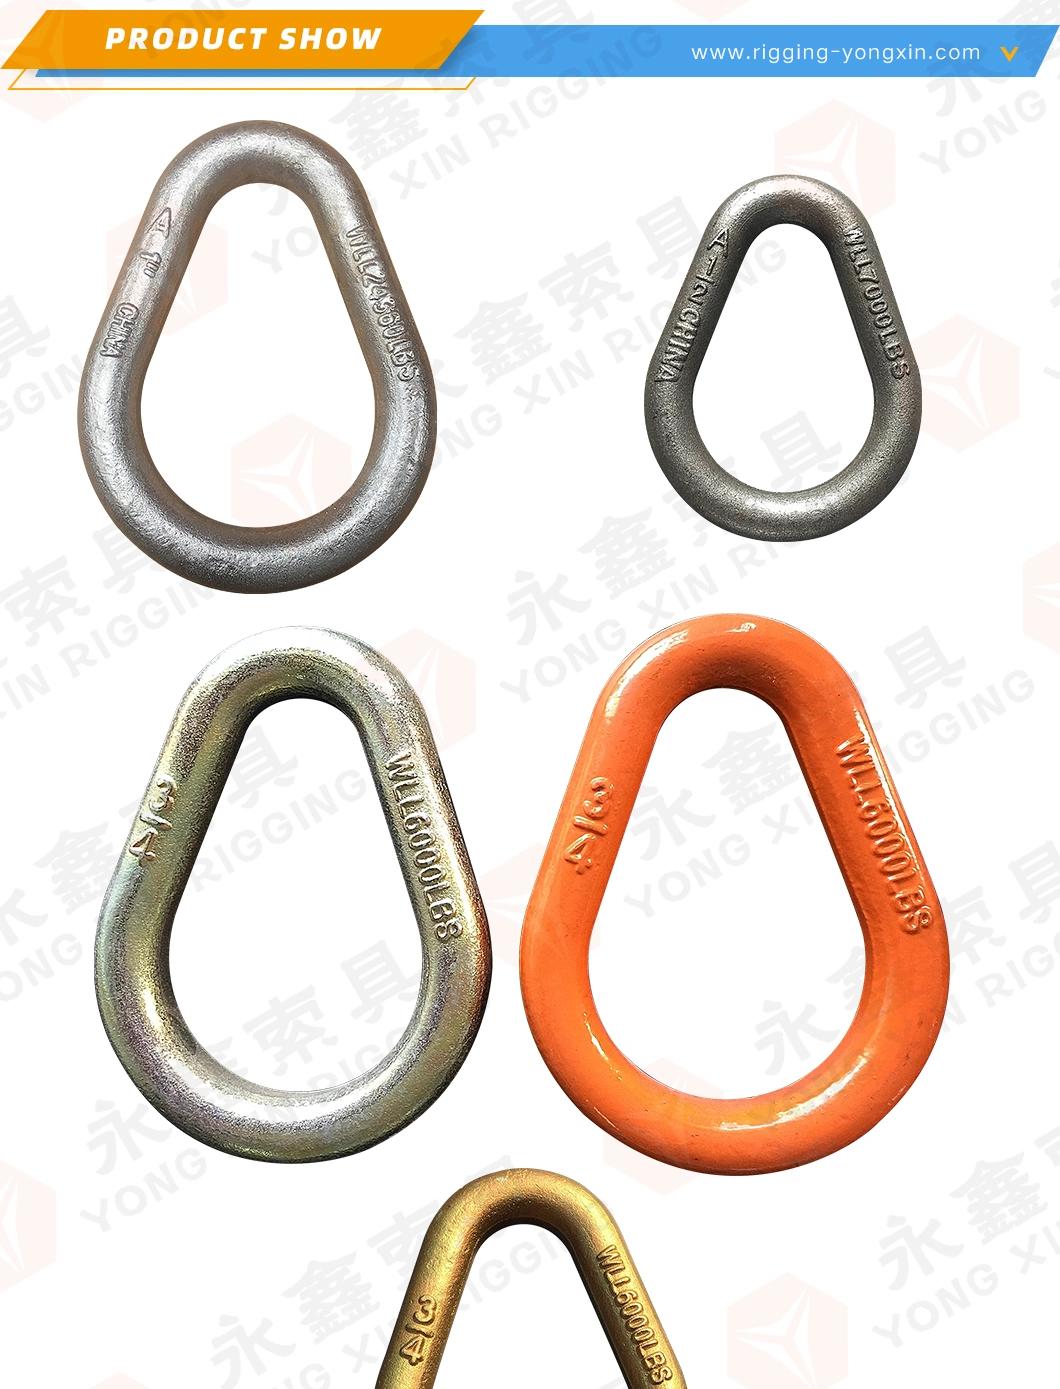 Factory Price Color Painted Pear Shaped Forged Steel Master Link for Rigging Fitting|Forged Pear Shape Ring Link|Master Link